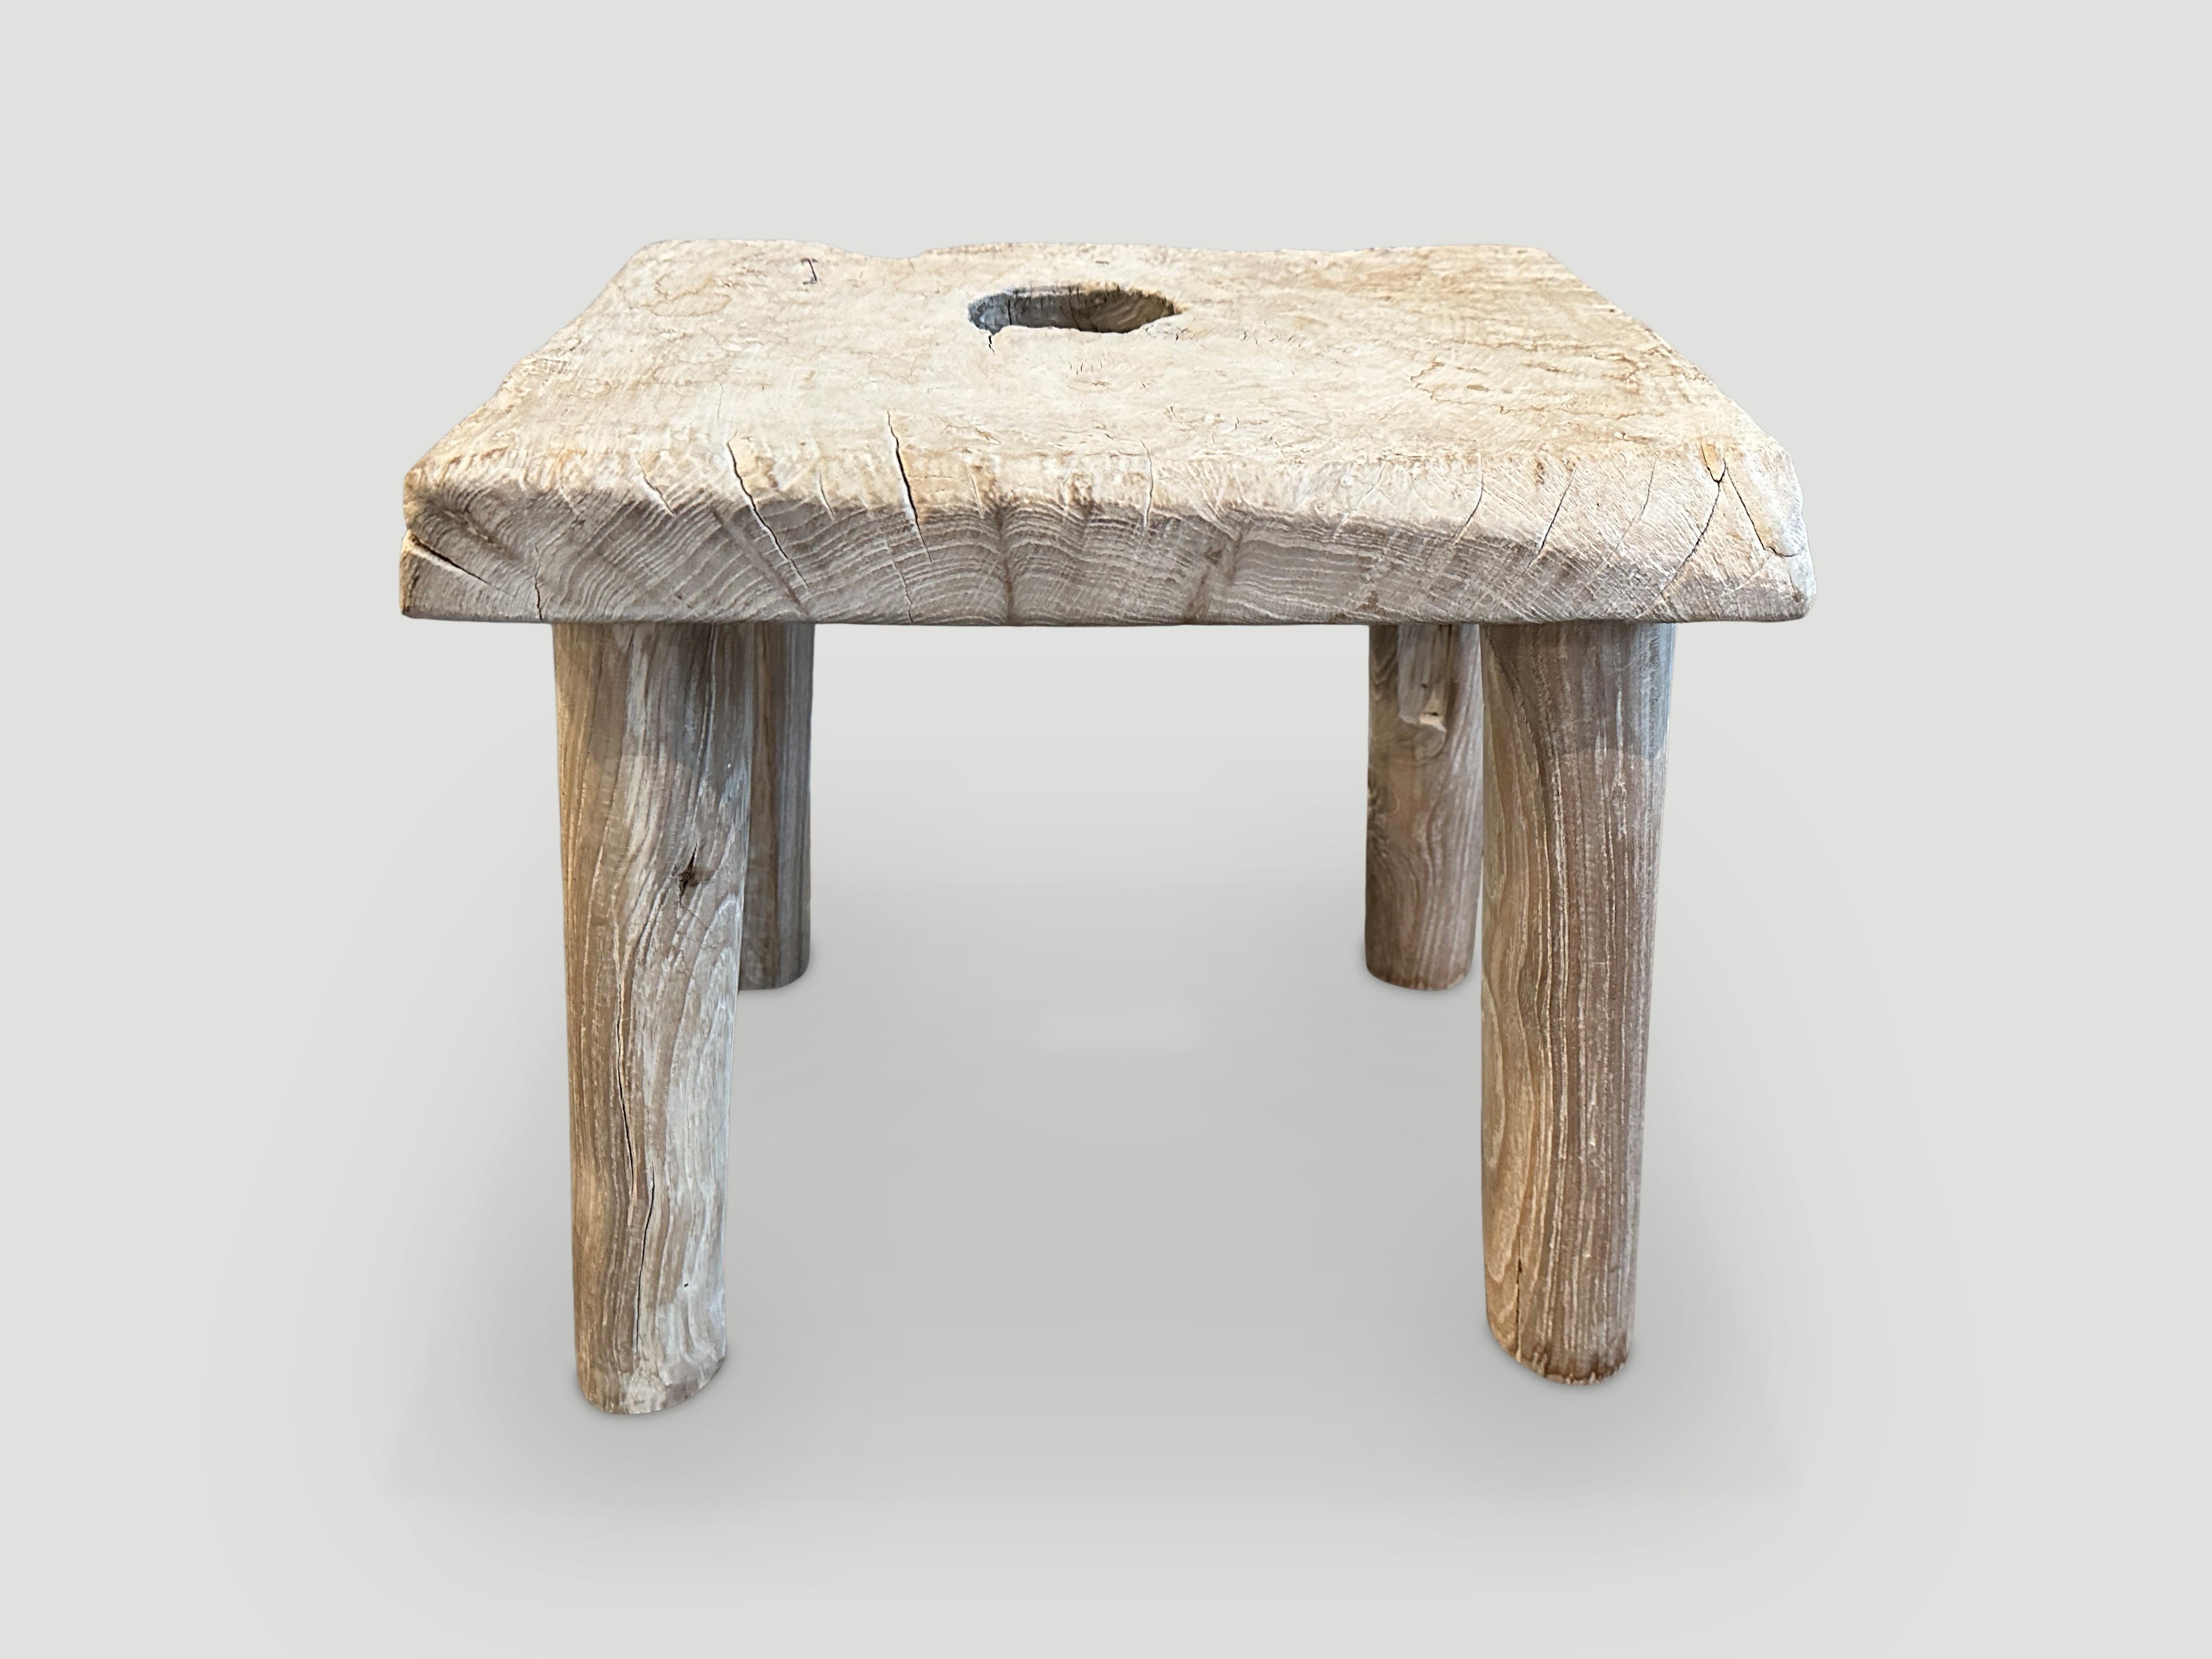 Reclaimed bleached teak stool or side table. We added minimalist cylinder legs to this organic thick slab top. 

The St. Barts Collection features an exciting new line of organic white wash, bleached and natural weathered teak furniture. The